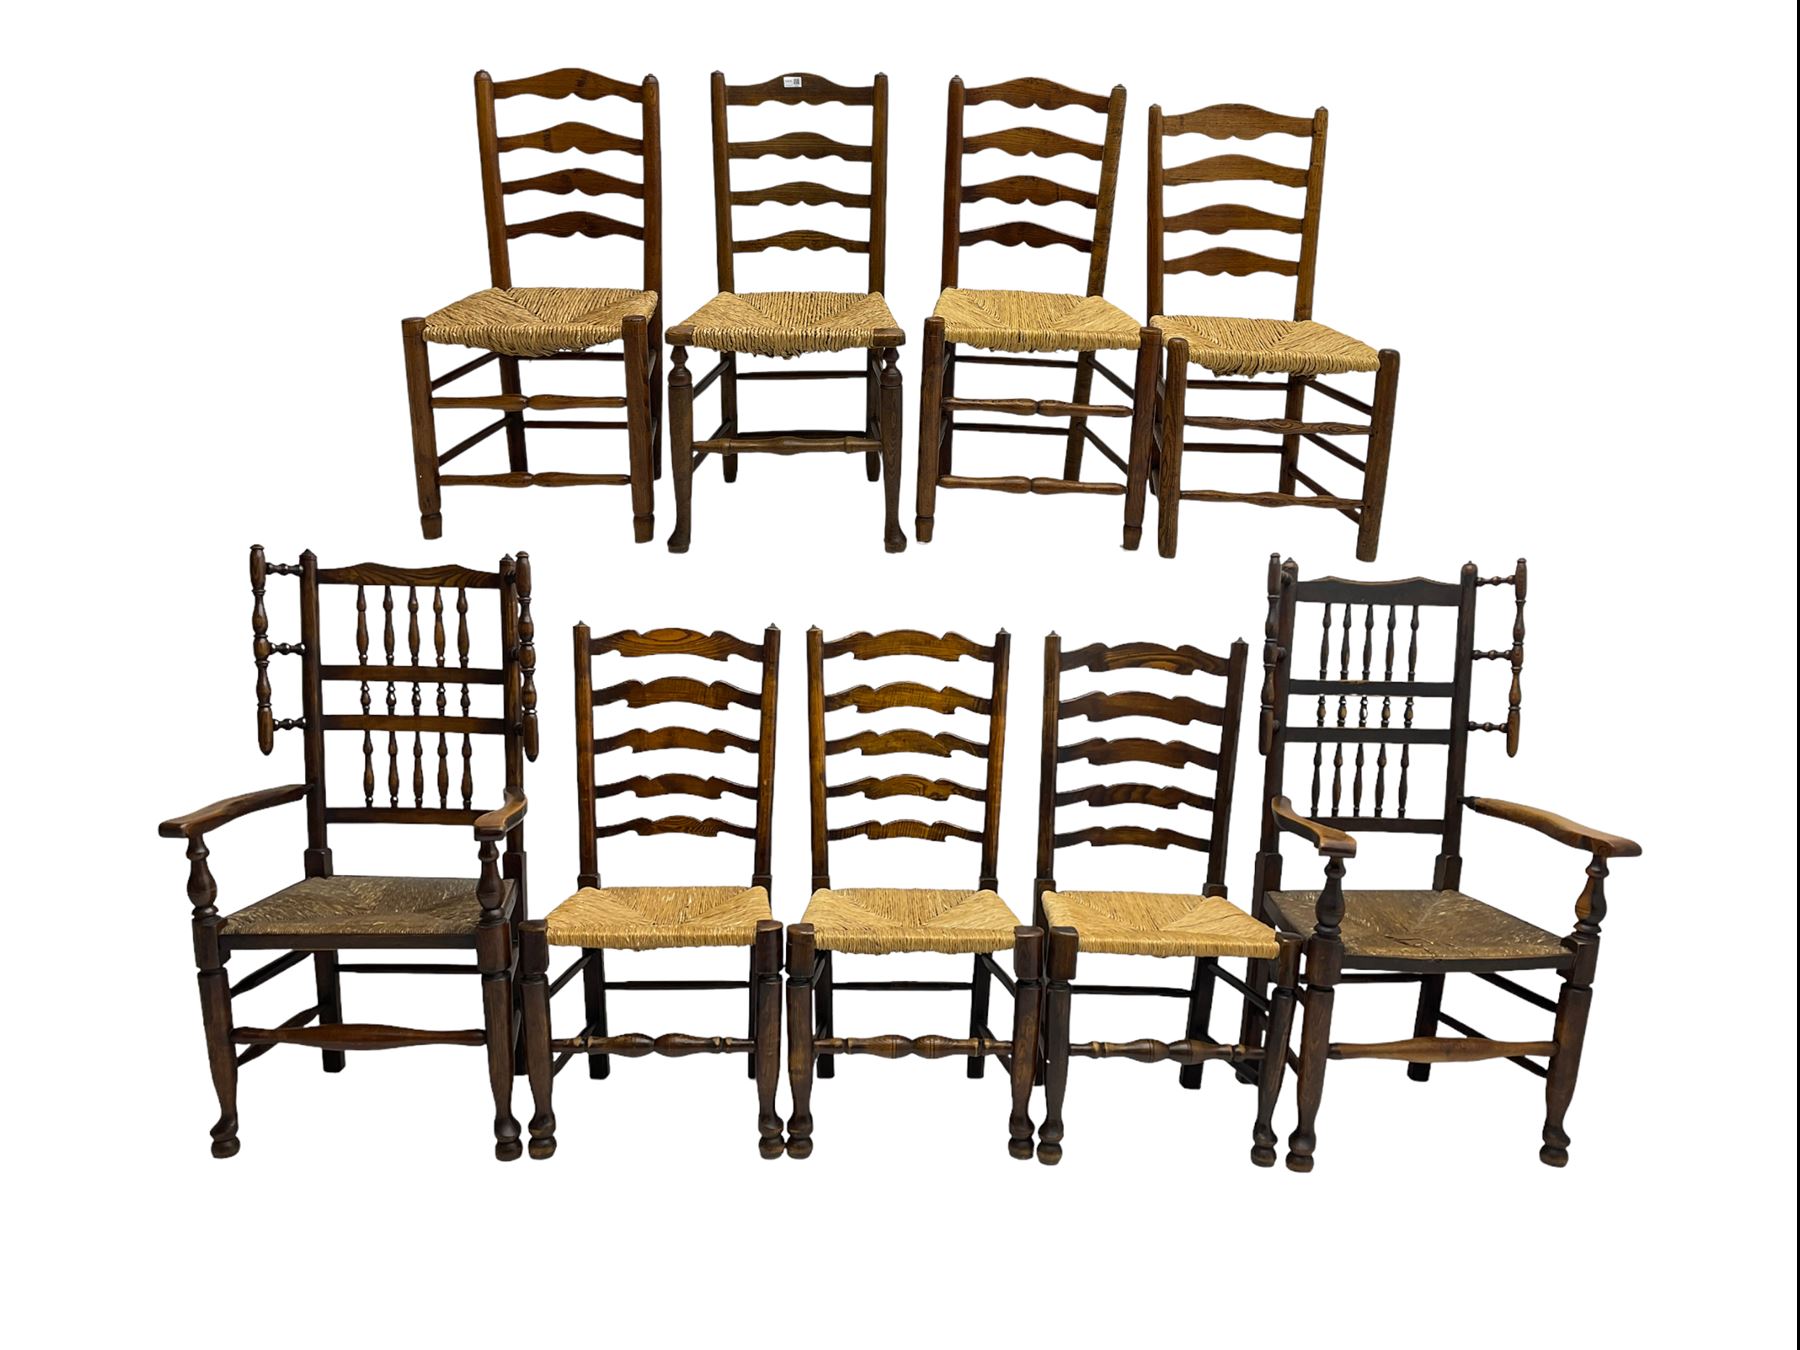 Harlequin set of nine country elm and beech chairs - pair 19th century spindle back carver armchairs